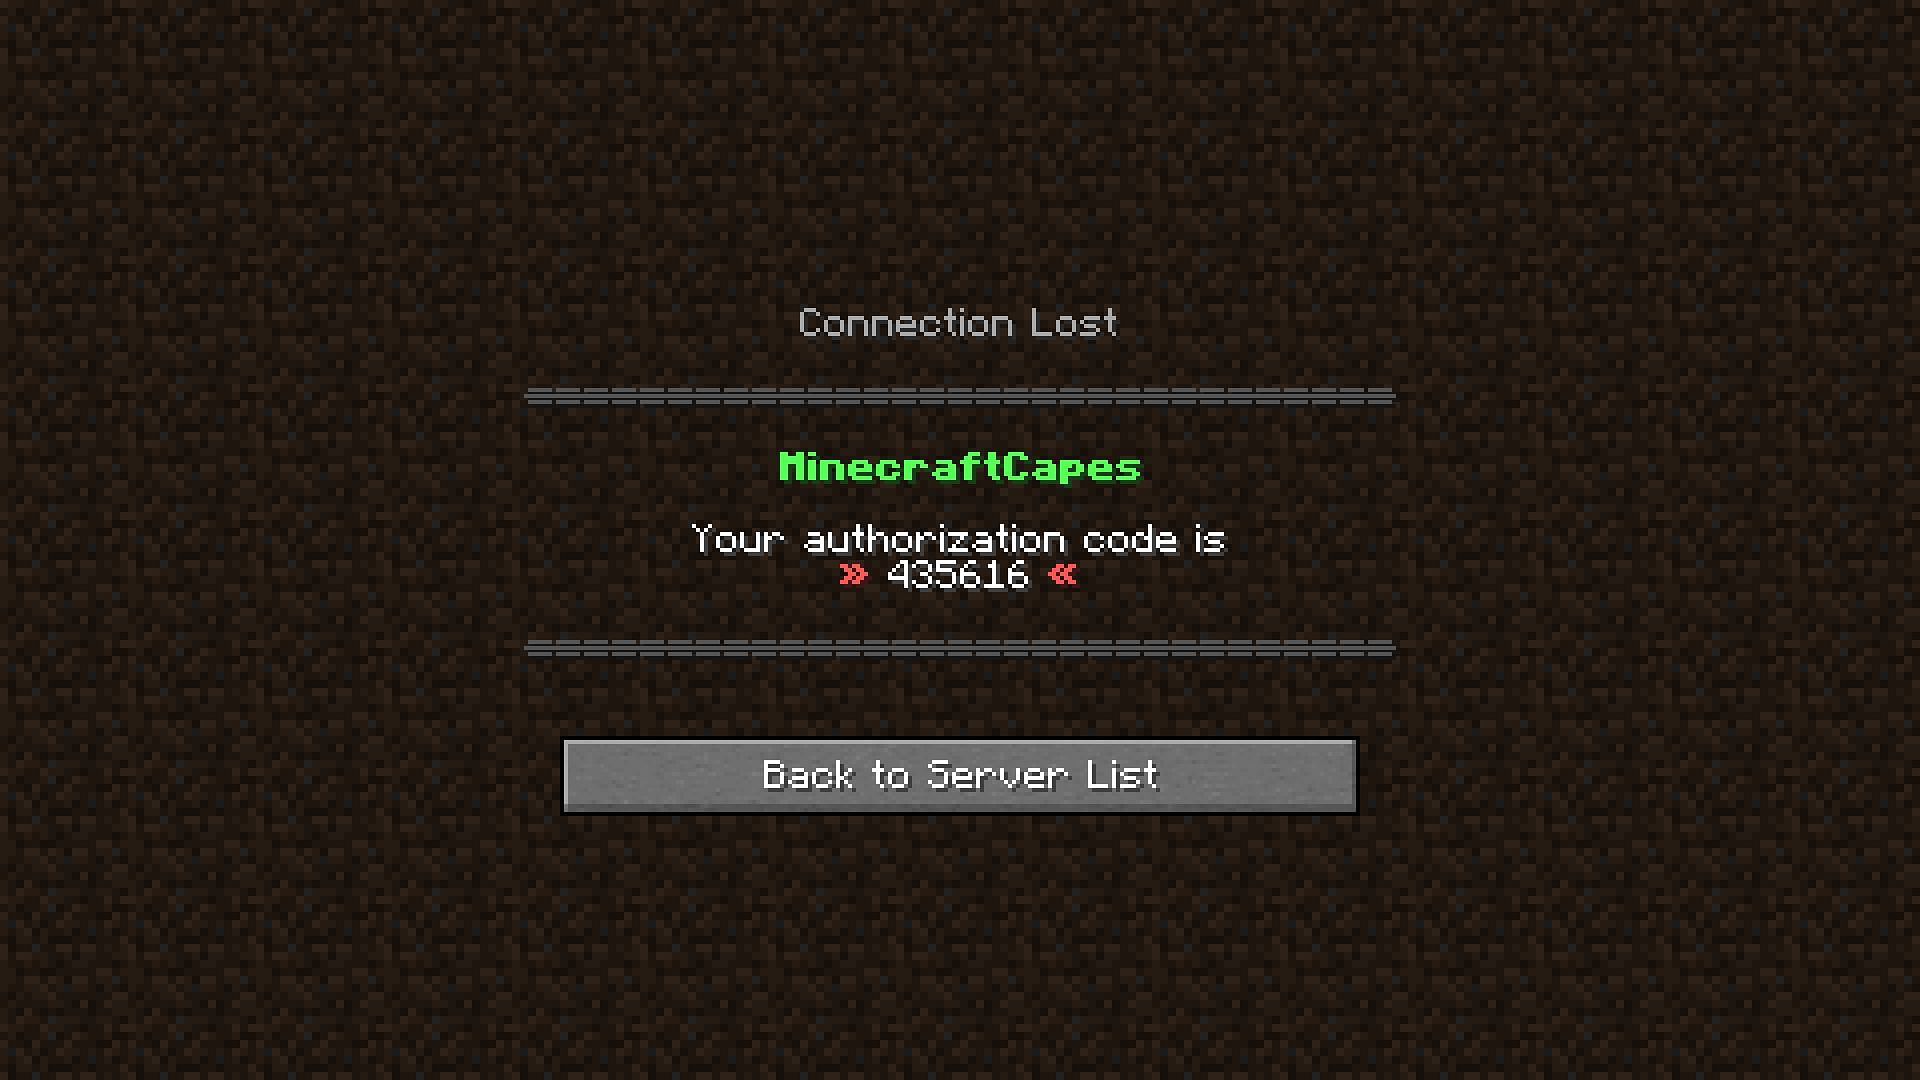 An authentication code will be given after entering the mod server (Image via Mojang)